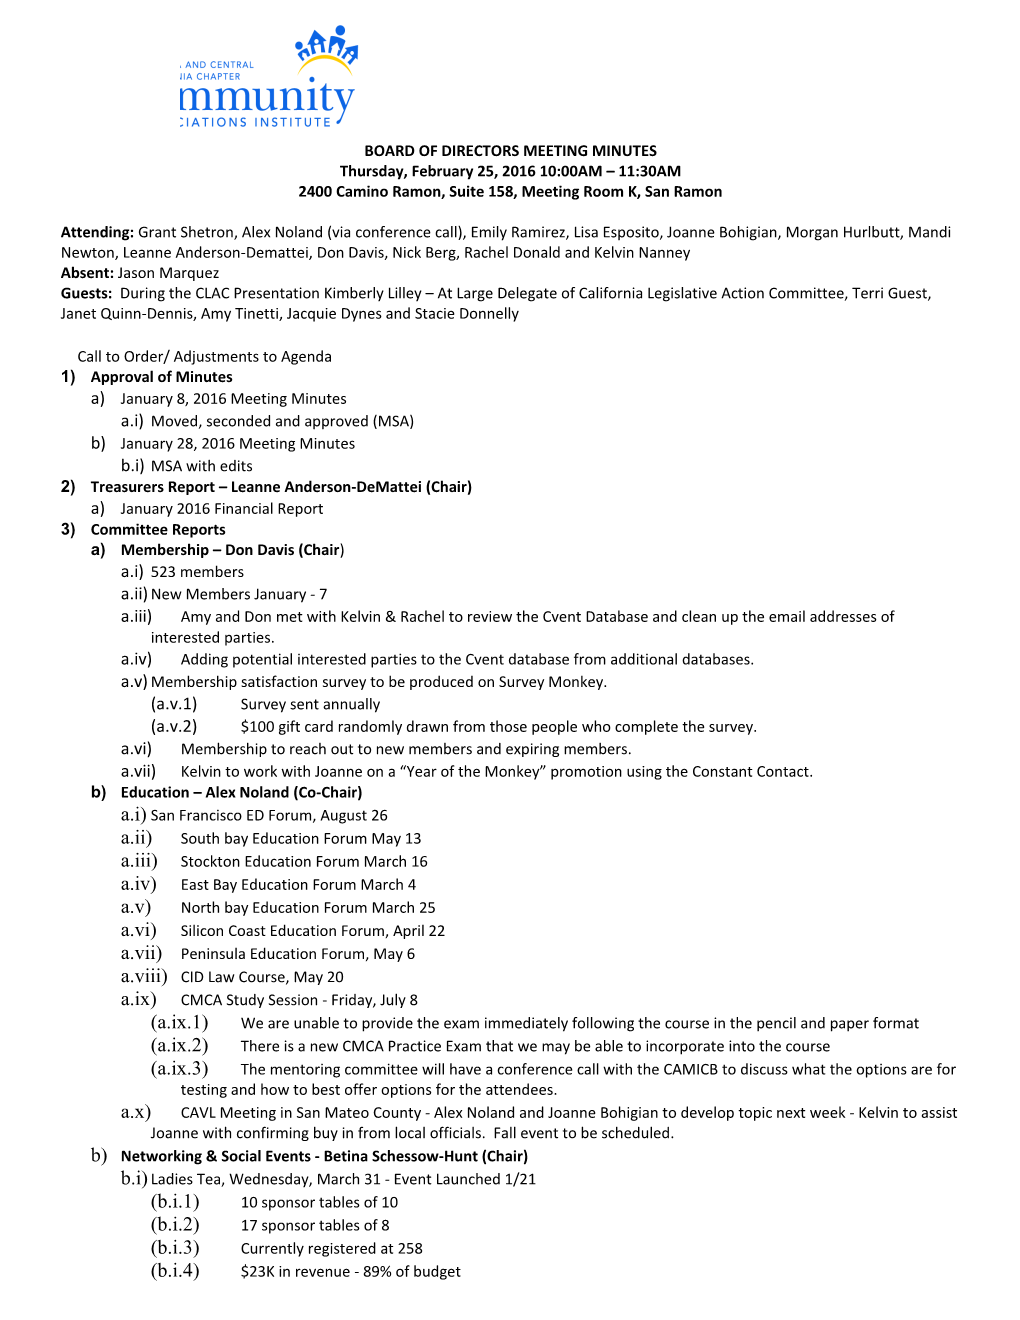 Board of Directors Meeting Agenda and CED Report